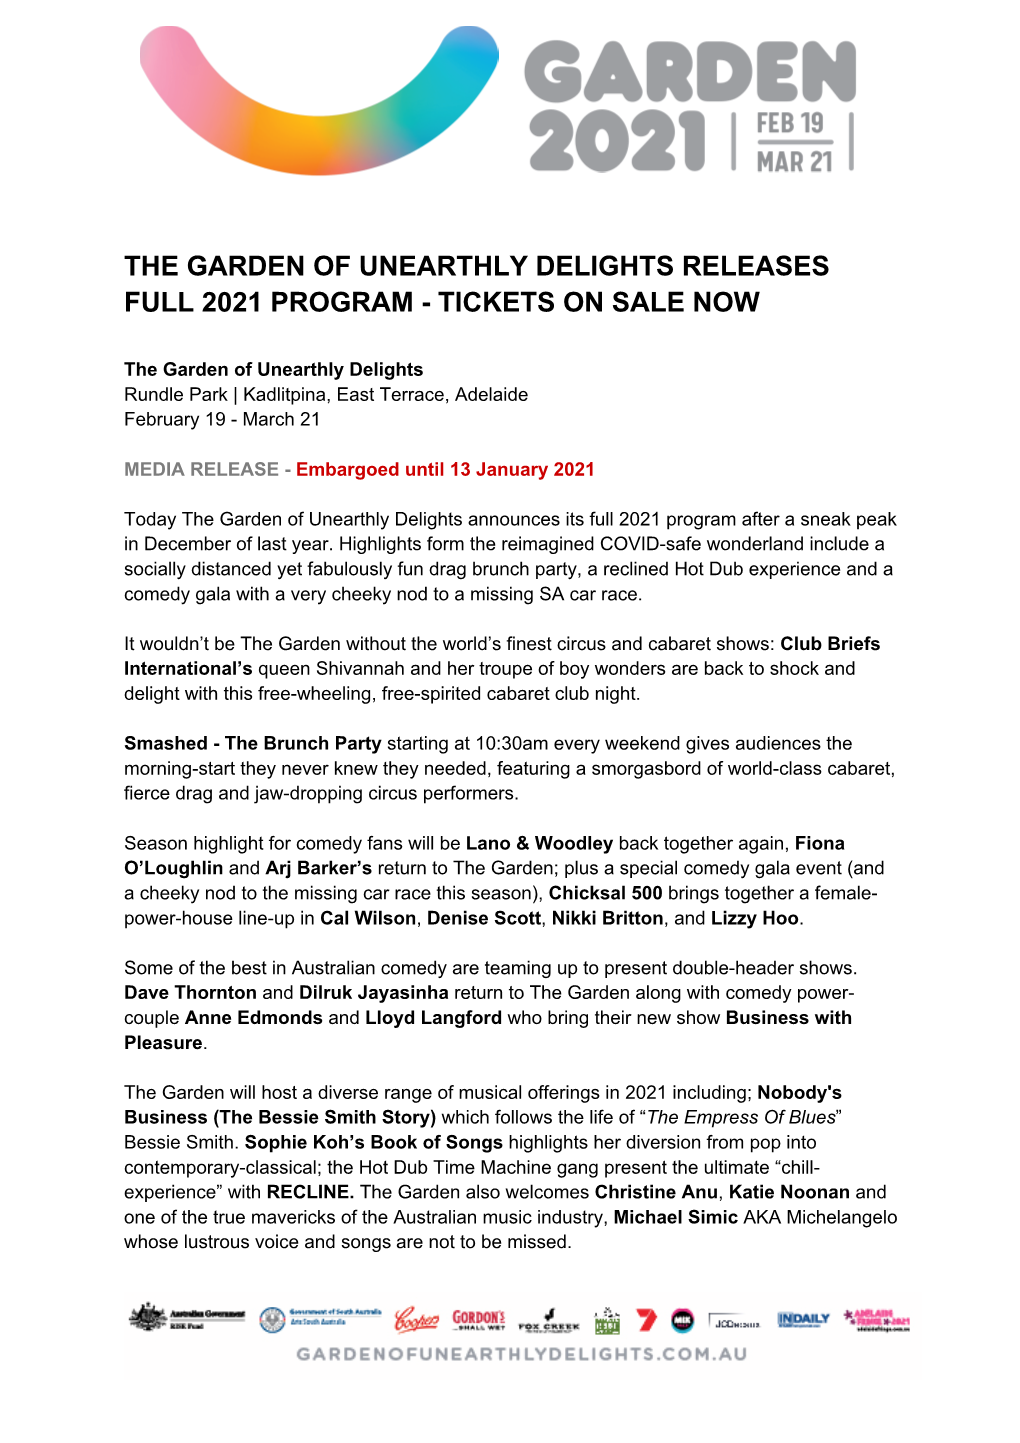 The Garden of Unearthly Delights Releases Full 2021 Program - Tickets on Sale Now